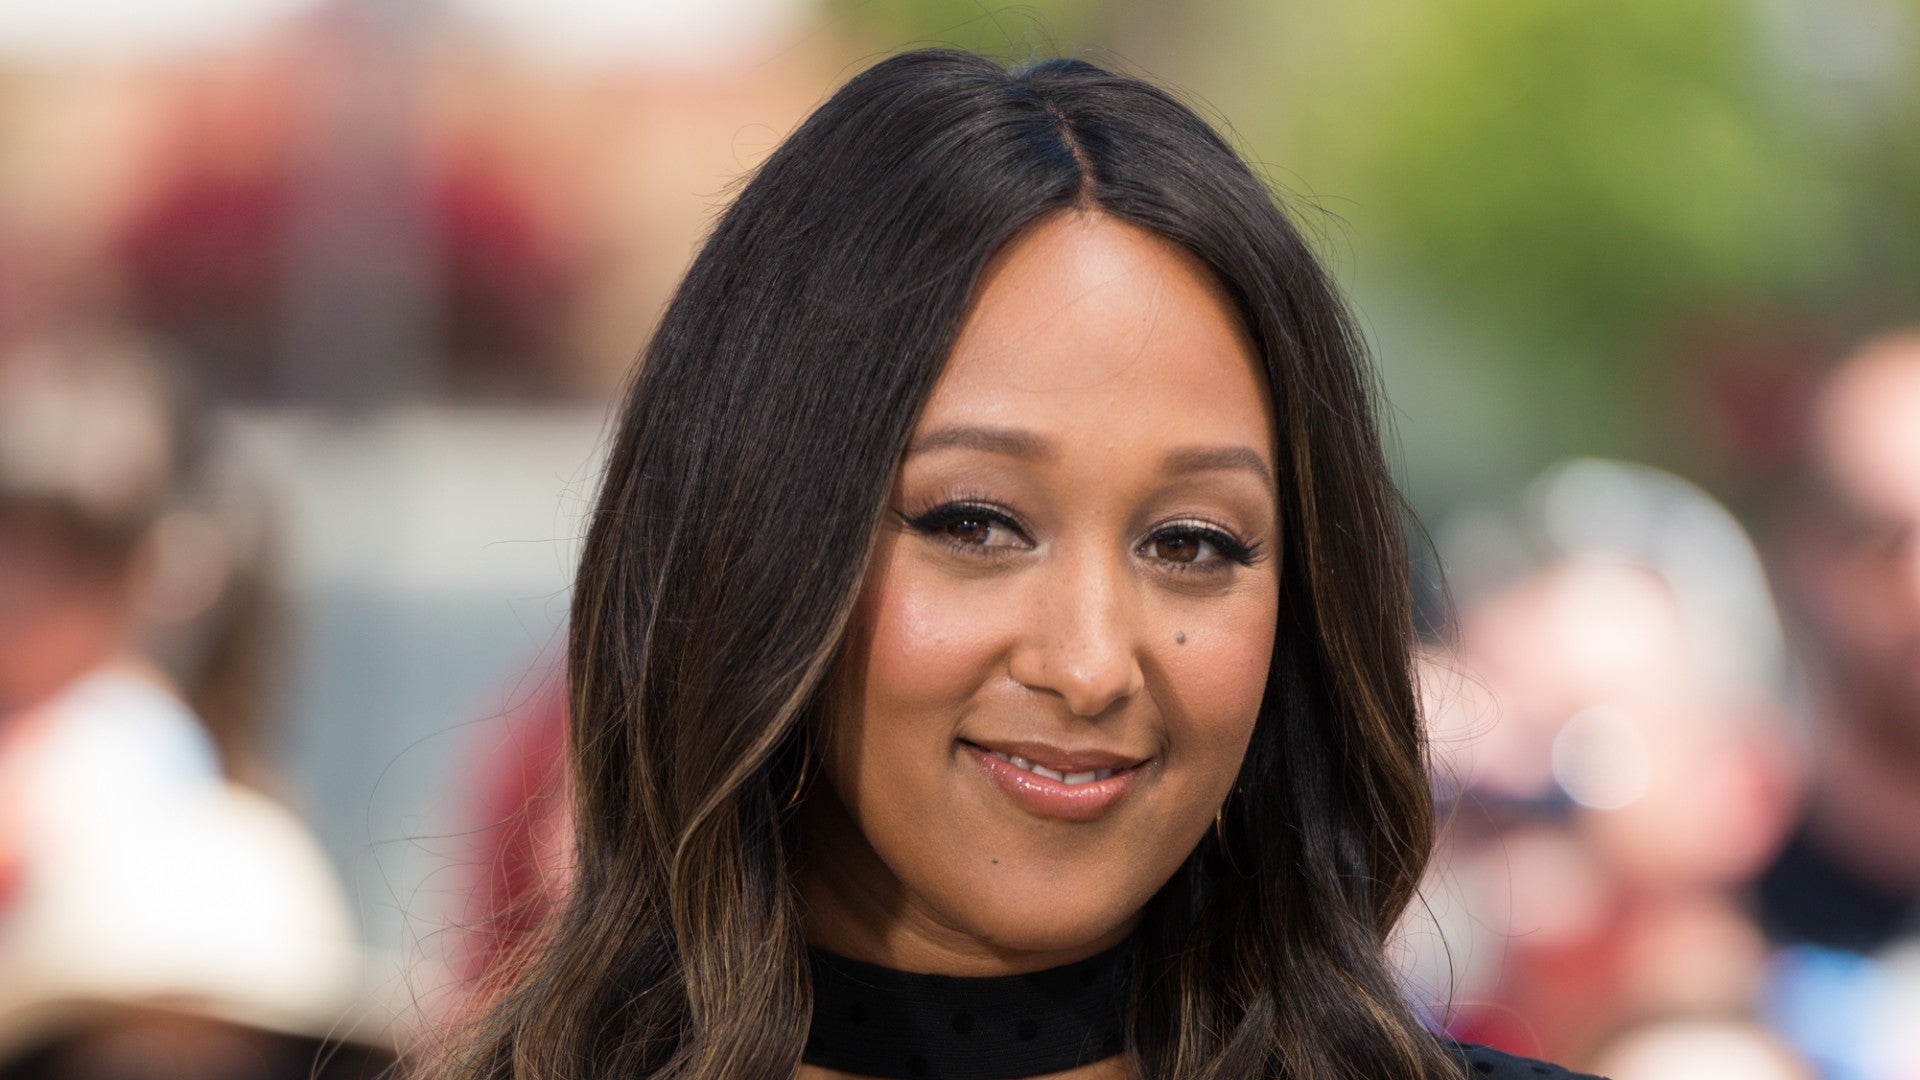 Tamera Mowry-Housley Proudly Shows Off Her Gray Hair